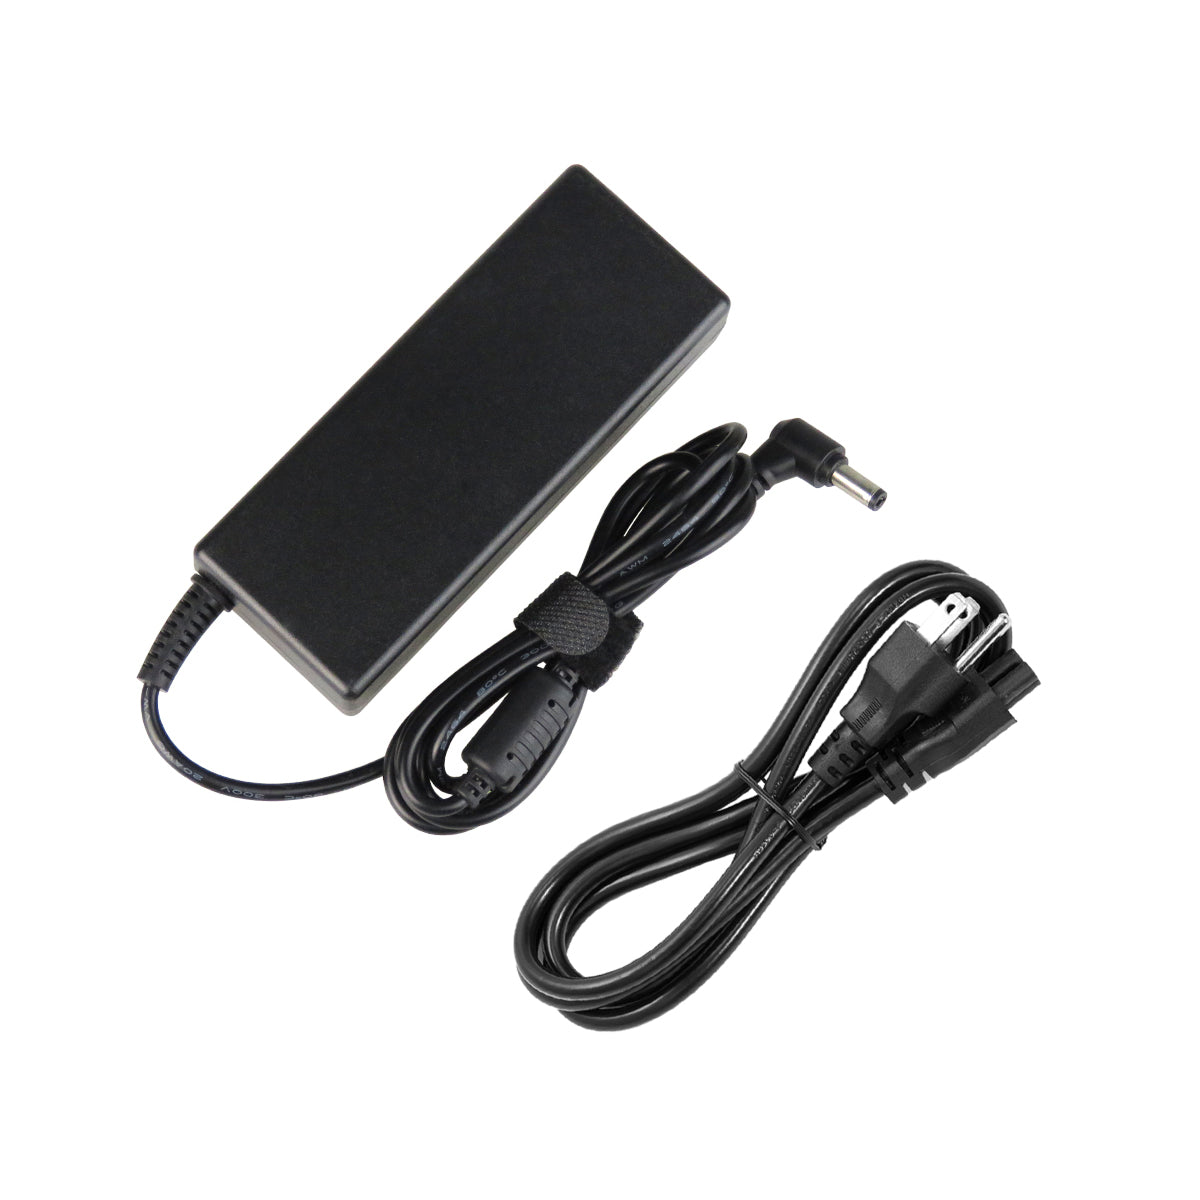 AC Adapter Charger for ASUS F55C Notebook.